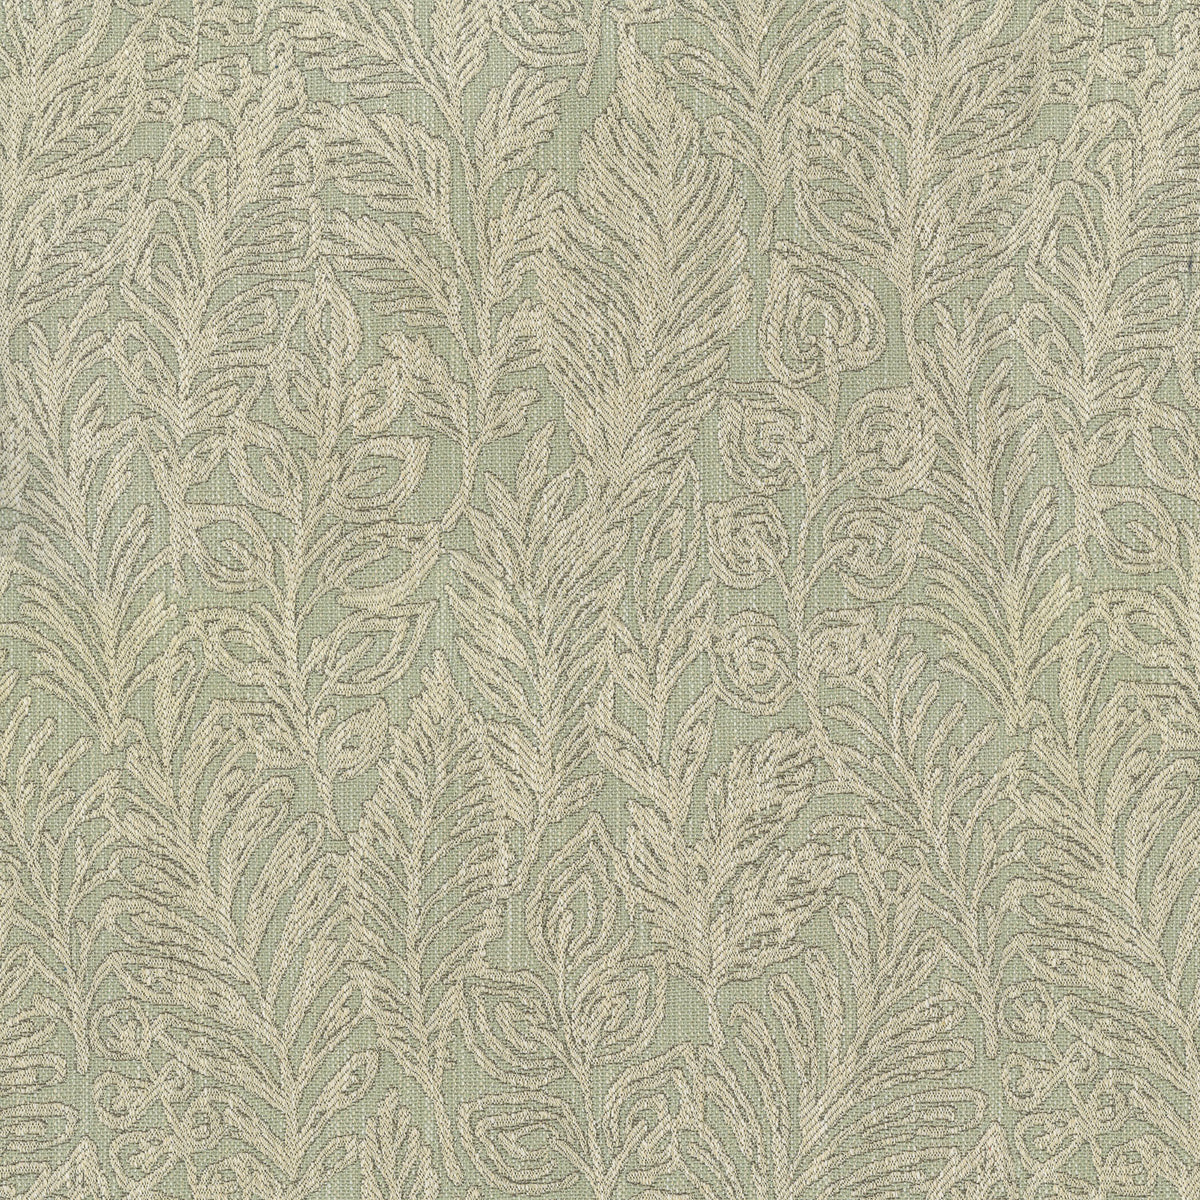 P/K Lifestyles Climbing Leaves - Sage 410220 Upholstery Fabric